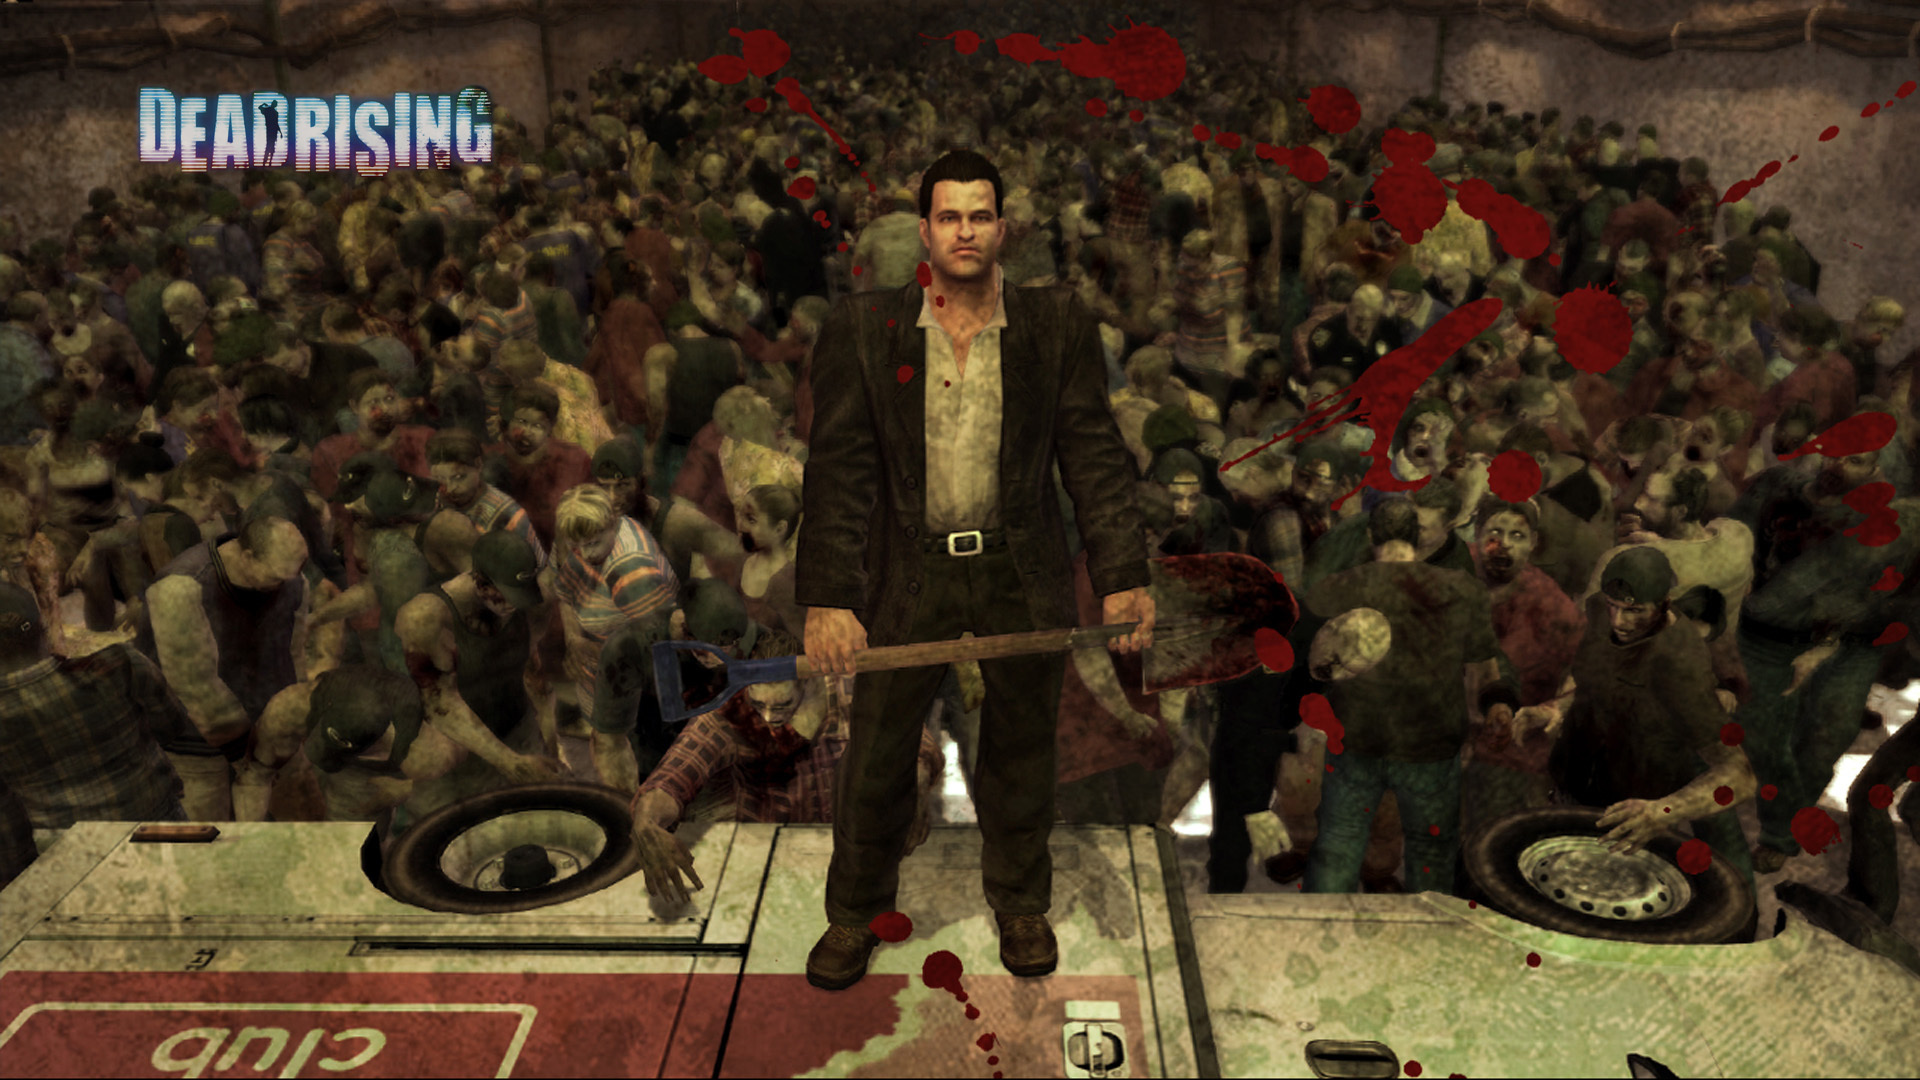 Dead Rising Nxe Submitted By Lorddiablo